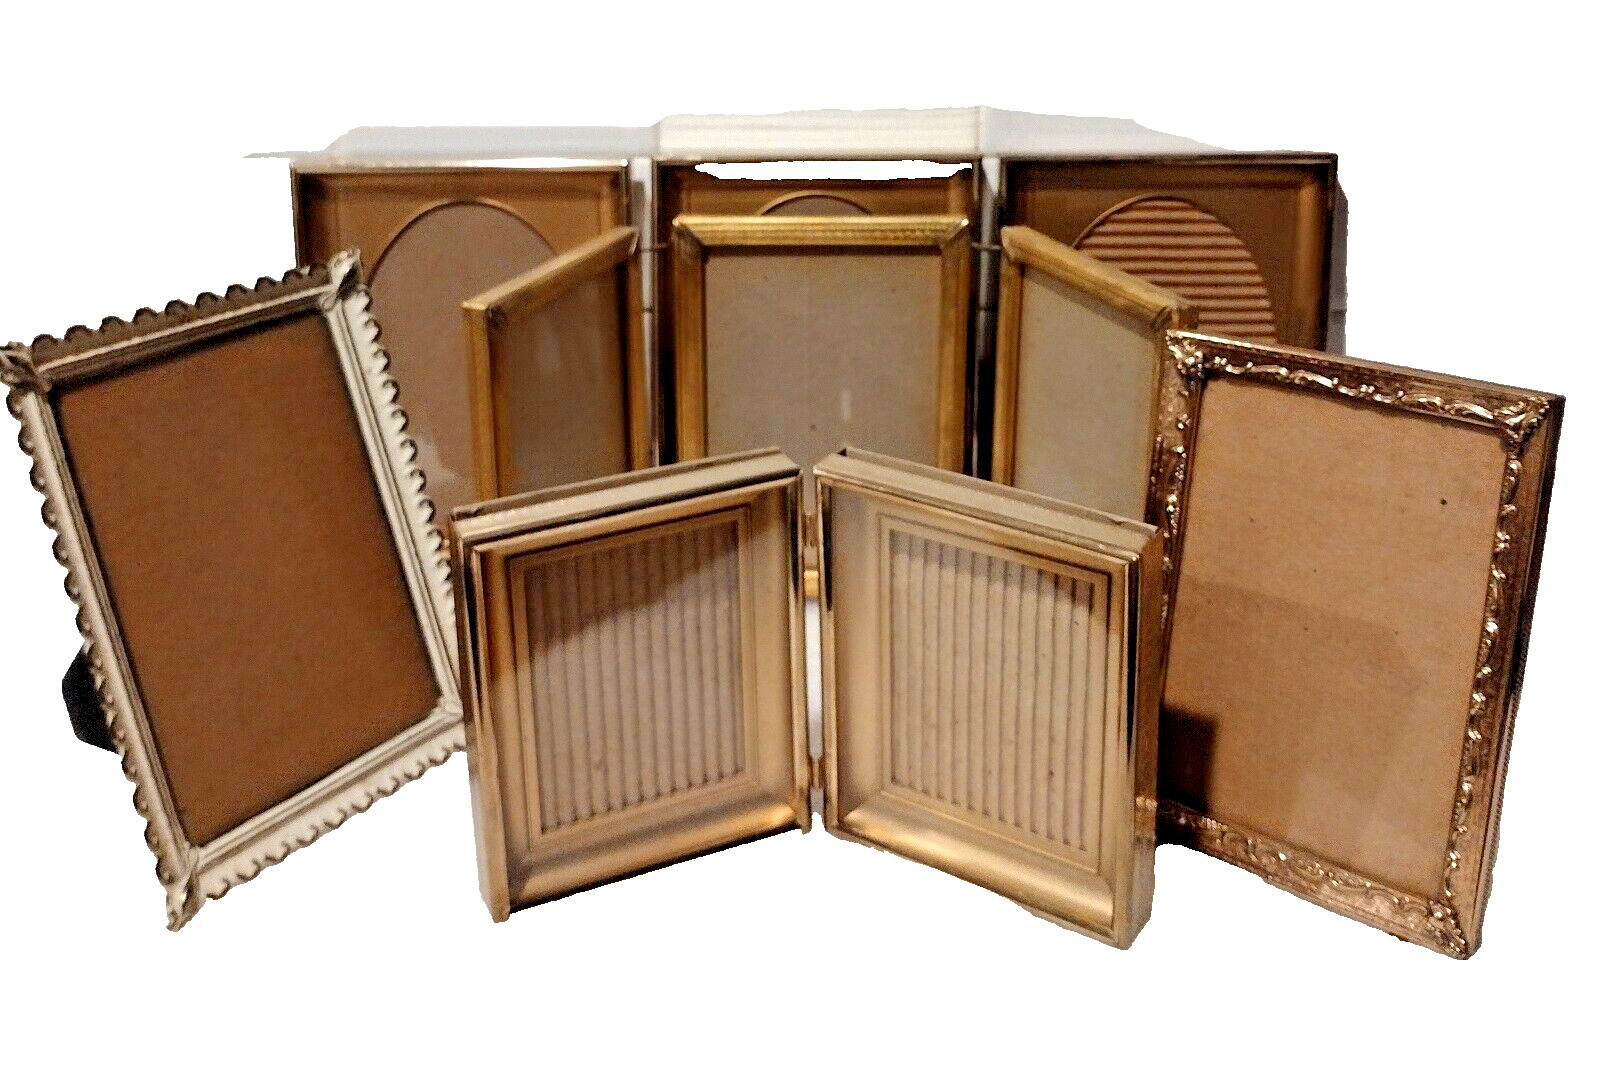 Lot Of 7 - Vintage Brass & Metal Picture Frames - Hinged/ Easel - 5x7 & 4x5 MCM